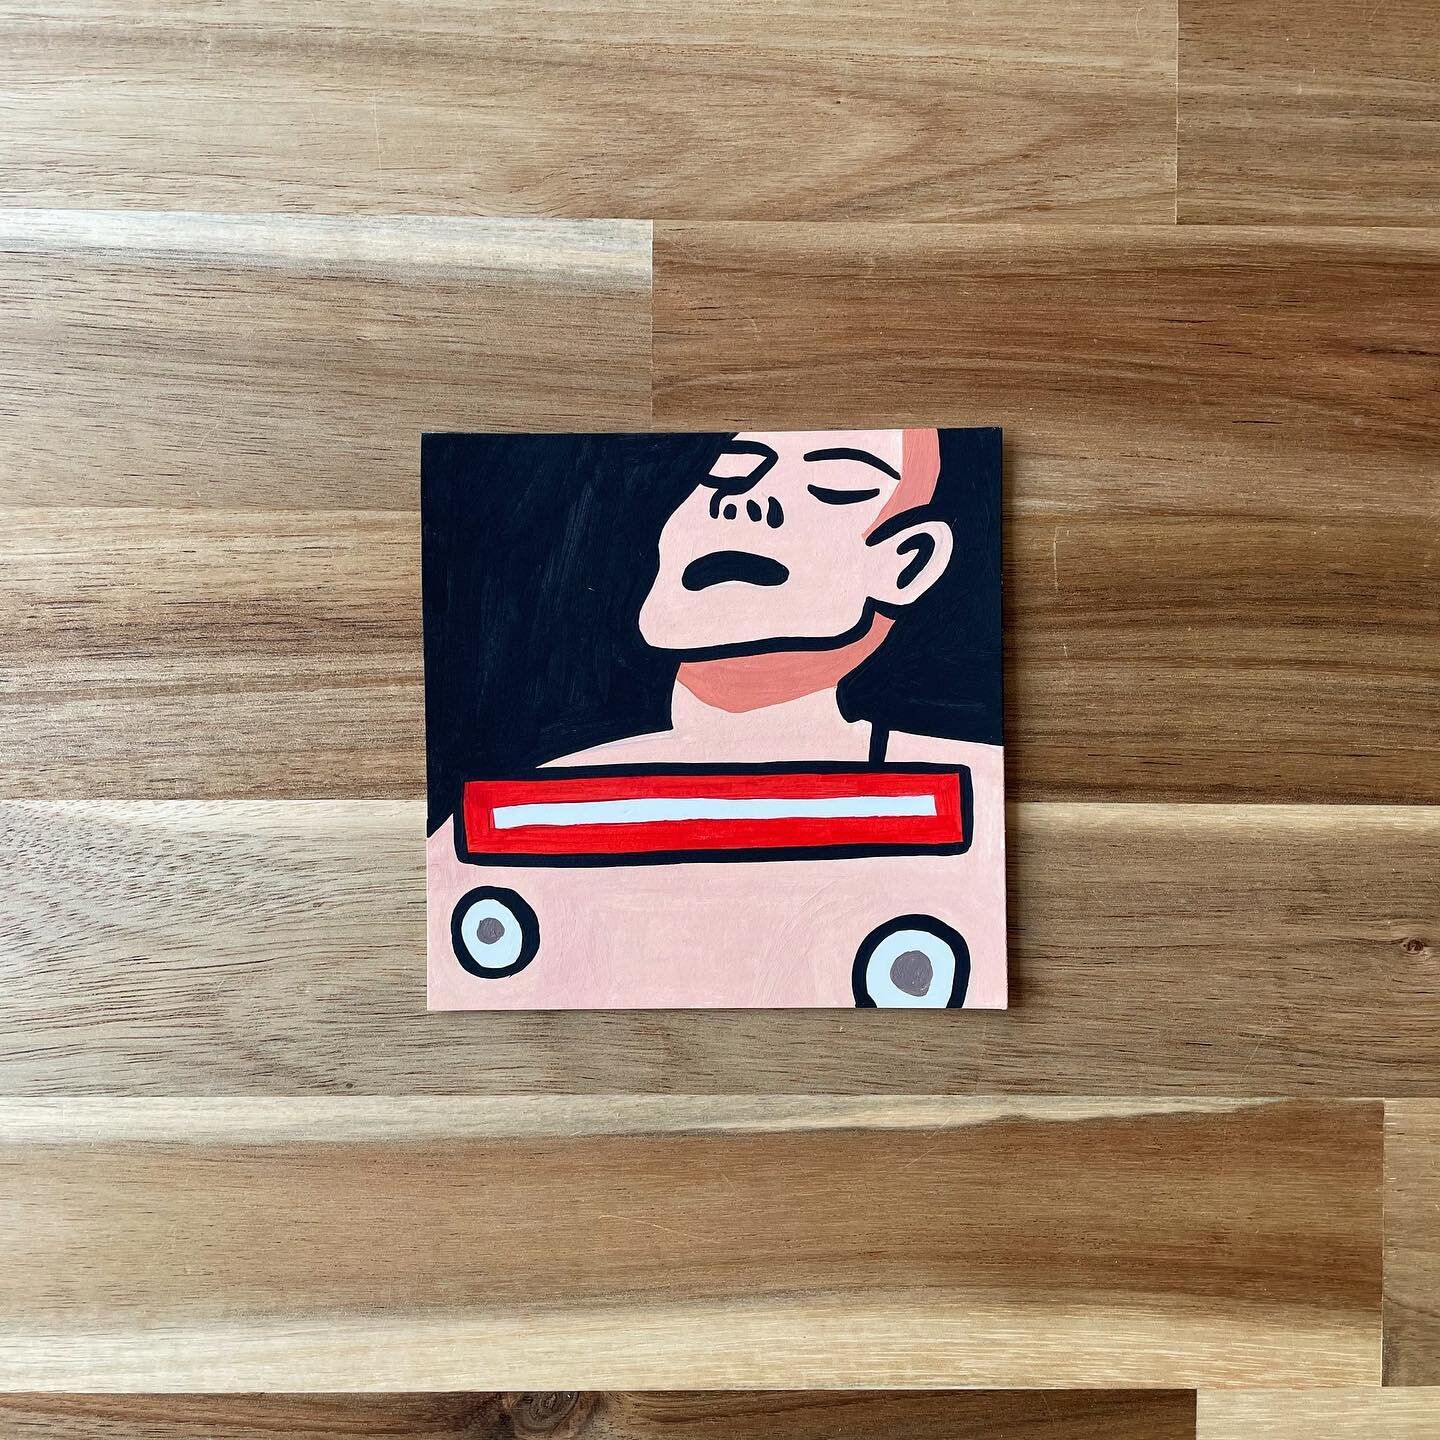 (87/100) Album &ldquo;The Bends&rdquo; by @radiohead🔥 Painted with acrylic on 4&rdquo; x 4&rdquo; paper for my #100albumswithlaura project 🌈

Fave song &ldquo;Fake Plastic Trees&rdquo; is nice to walk to, and look at strangers 🥰

Scroll to see the